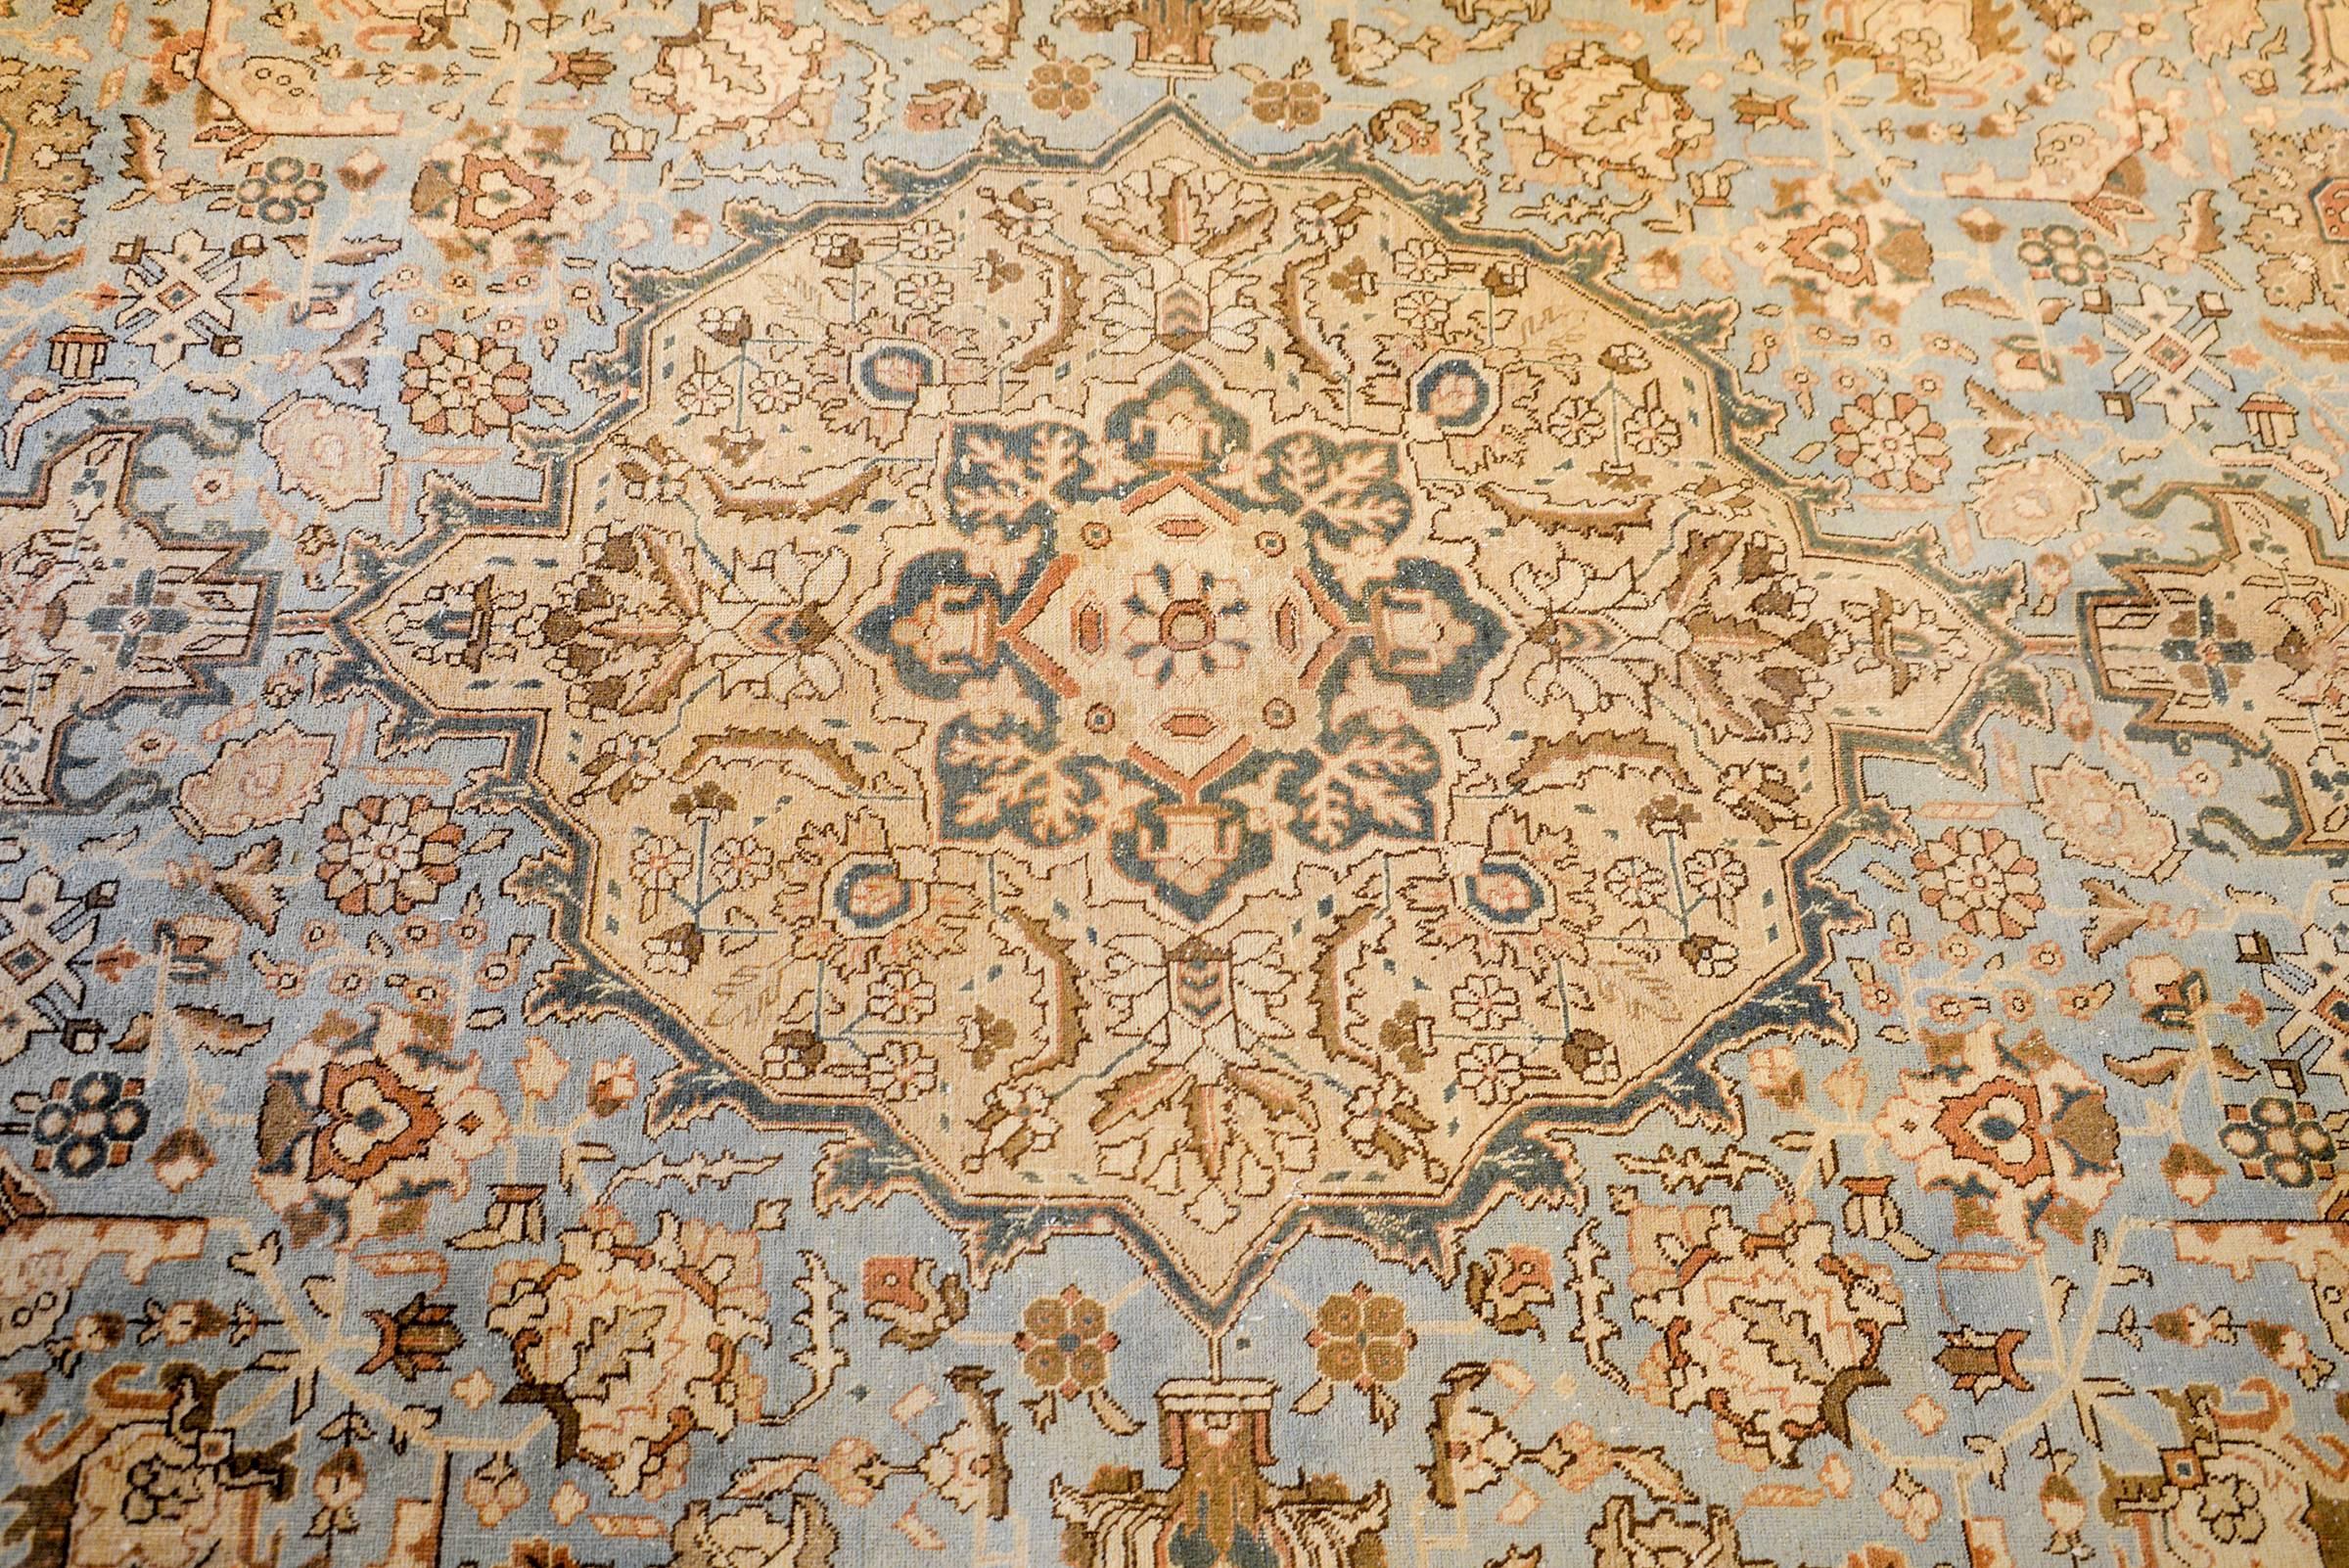 A wonderful mid-20th century Persian Tabriz rug with a fantastic pattern of intricately and tightly woven pattern containing a large central medallion amidst a field of multicolored flowers and scrolling vines woven in vegetable dyed wool. The